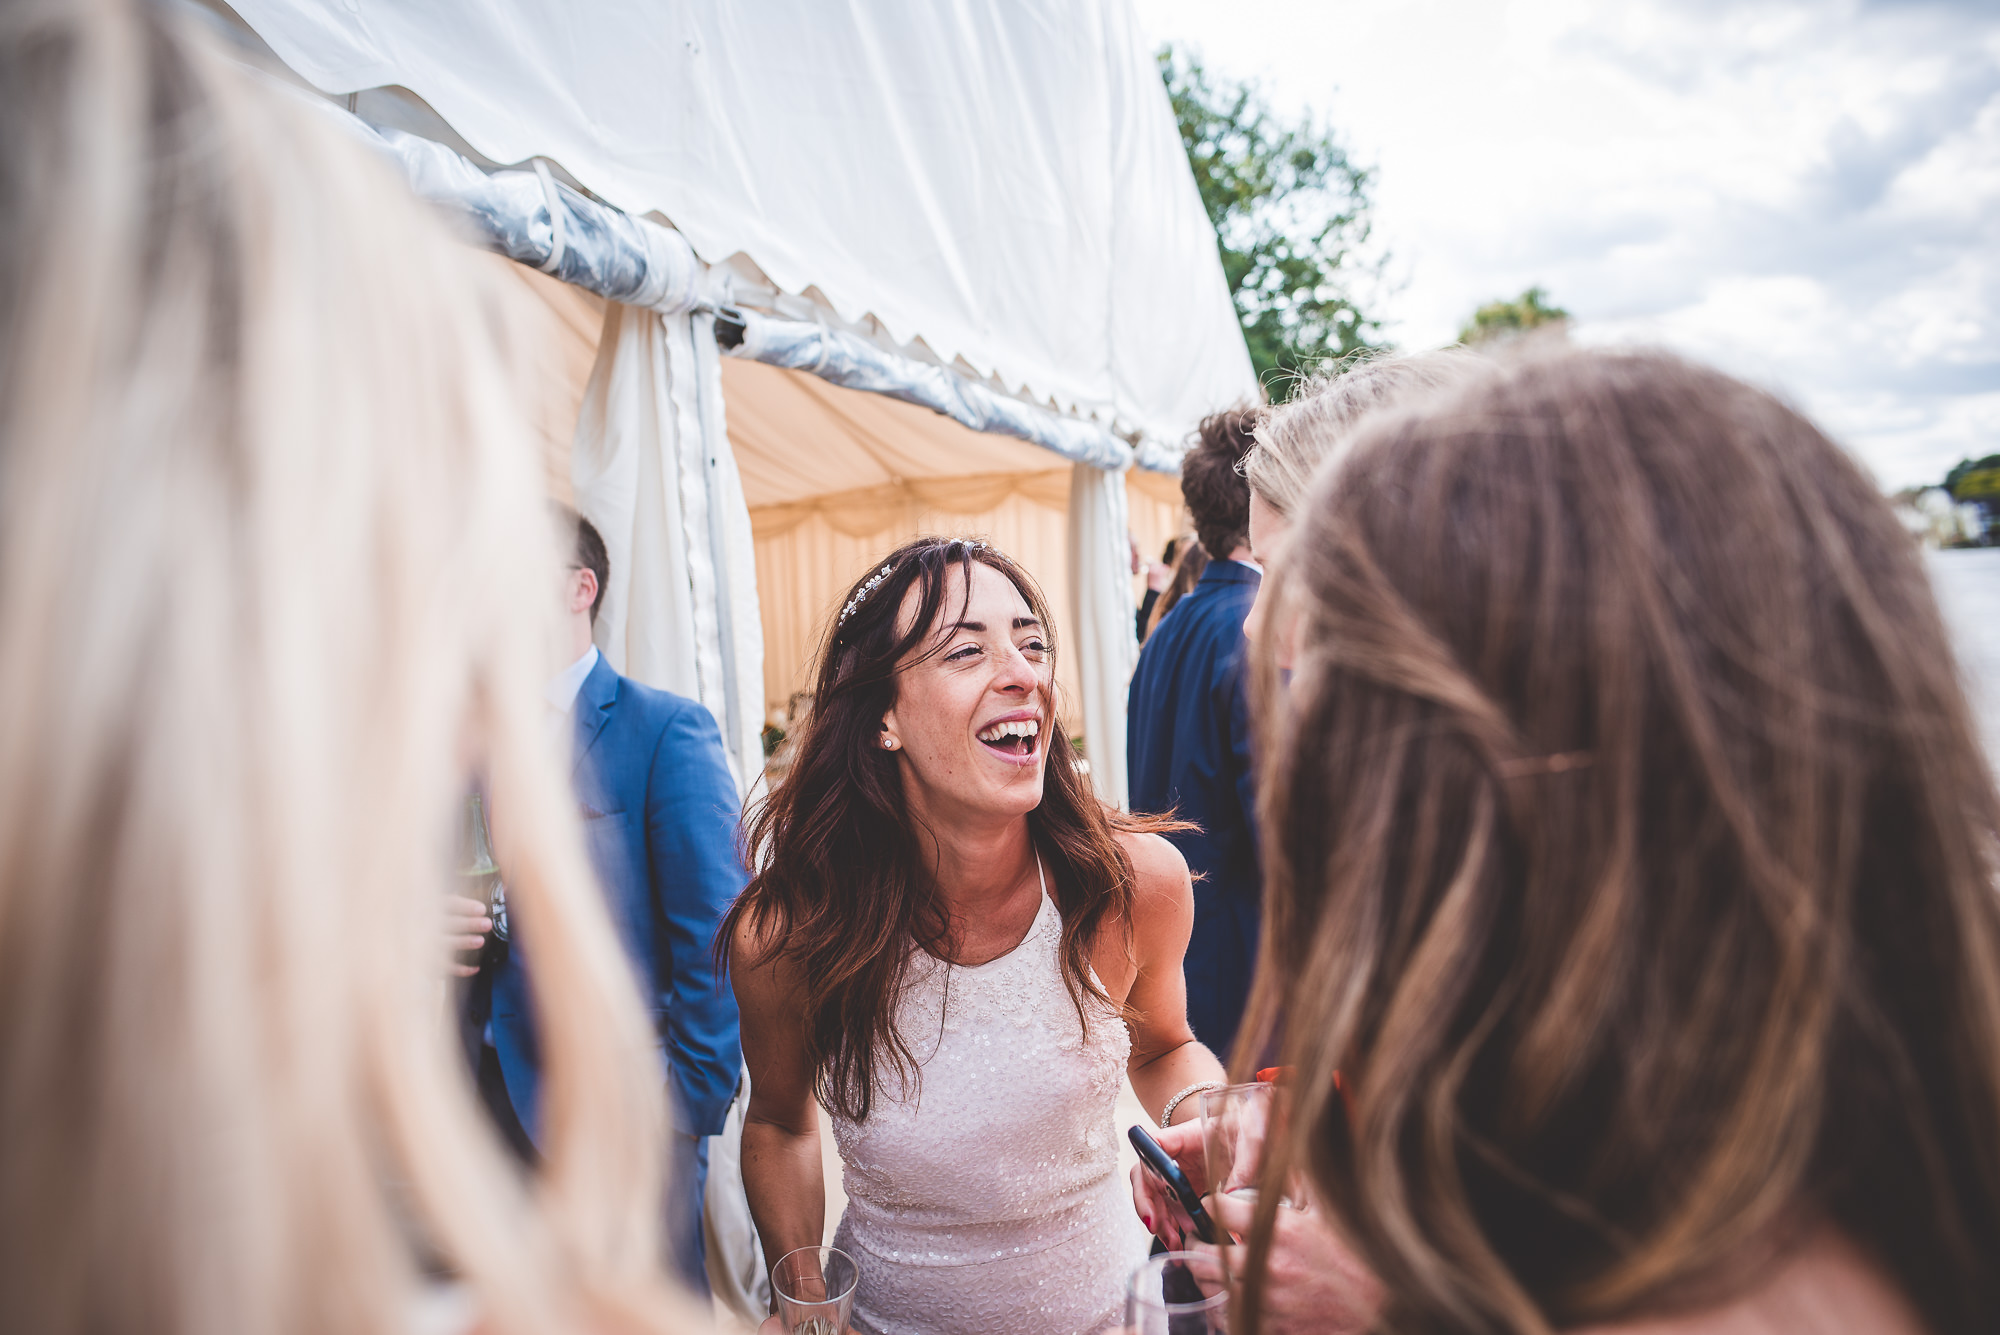 A wedding photographer captures a group of women laughing at a wedding reception in a memorable wedding photo.